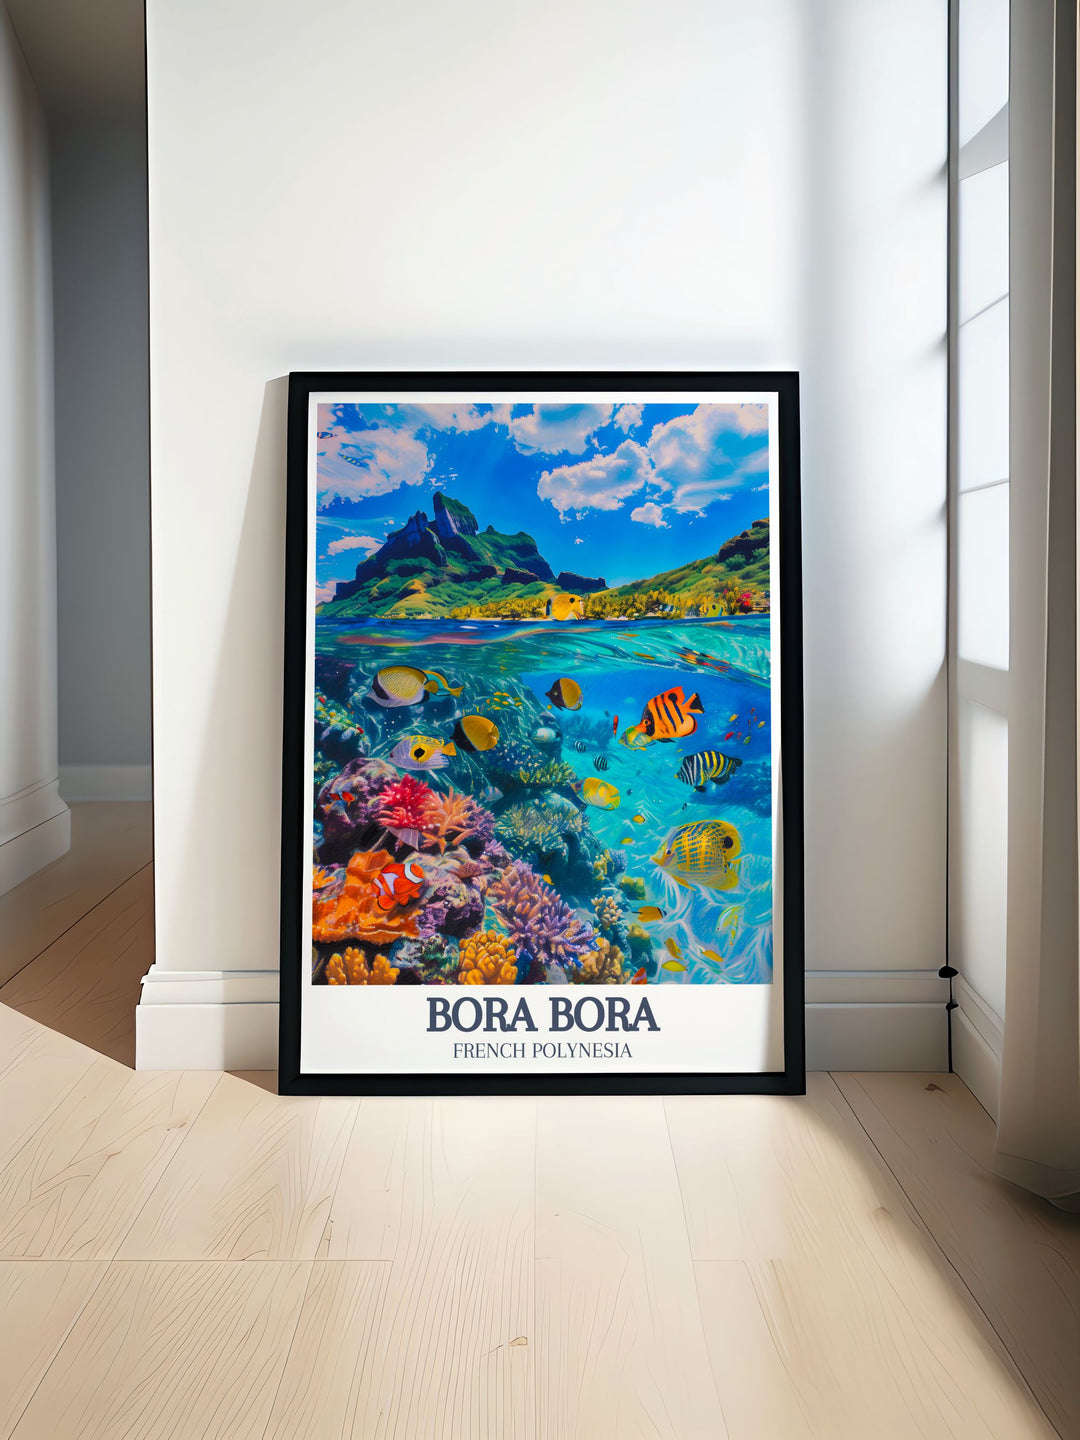 Bora Bora Lagoon Coral Gardens travel poster featuring stunning turquoise waters and vibrant coral reefs perfect addition to any art and collectibles collection capturing the essence of French Polynesia ideal for home decor and wall art enthusiasts seeking a touch of paradise.